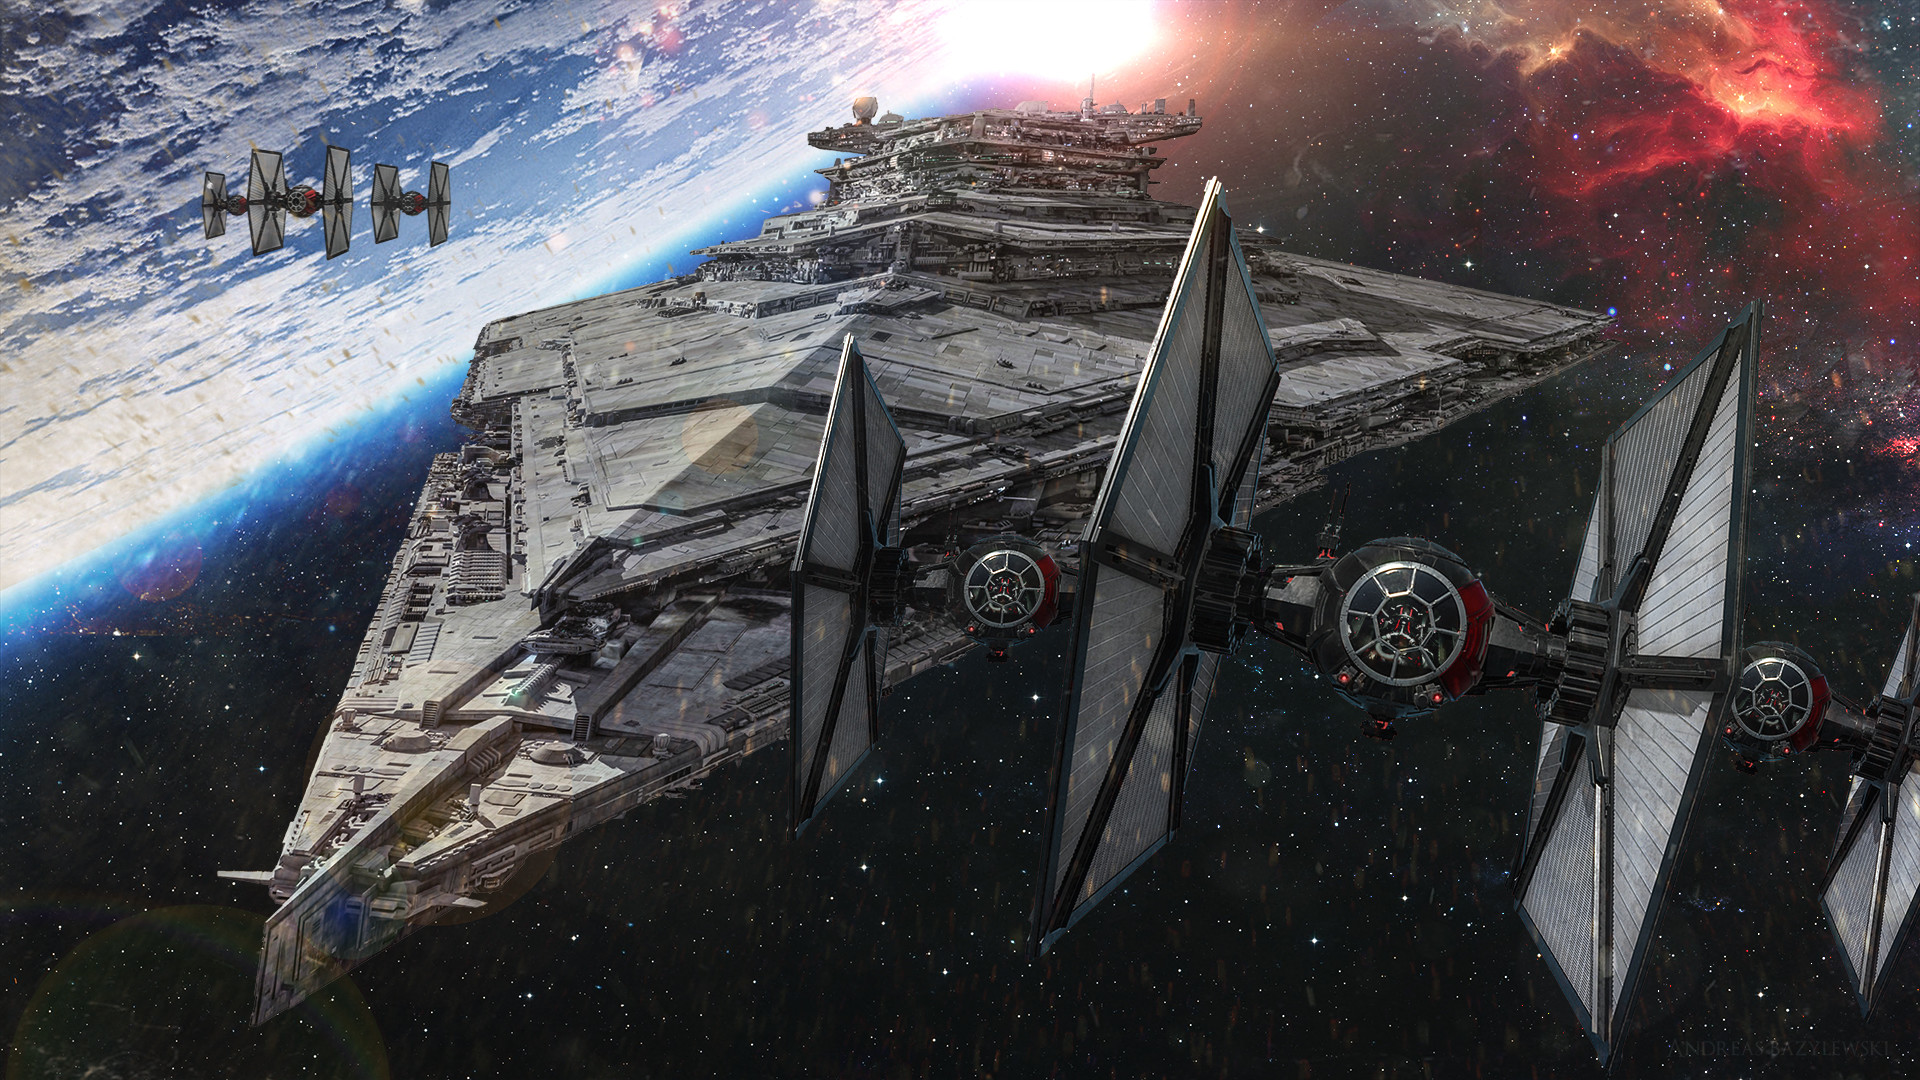 1920x1080 Star Wars Episode VII The Force Awakens Wallpapers 6521406, Wallpapers for  Free | Best HDQ